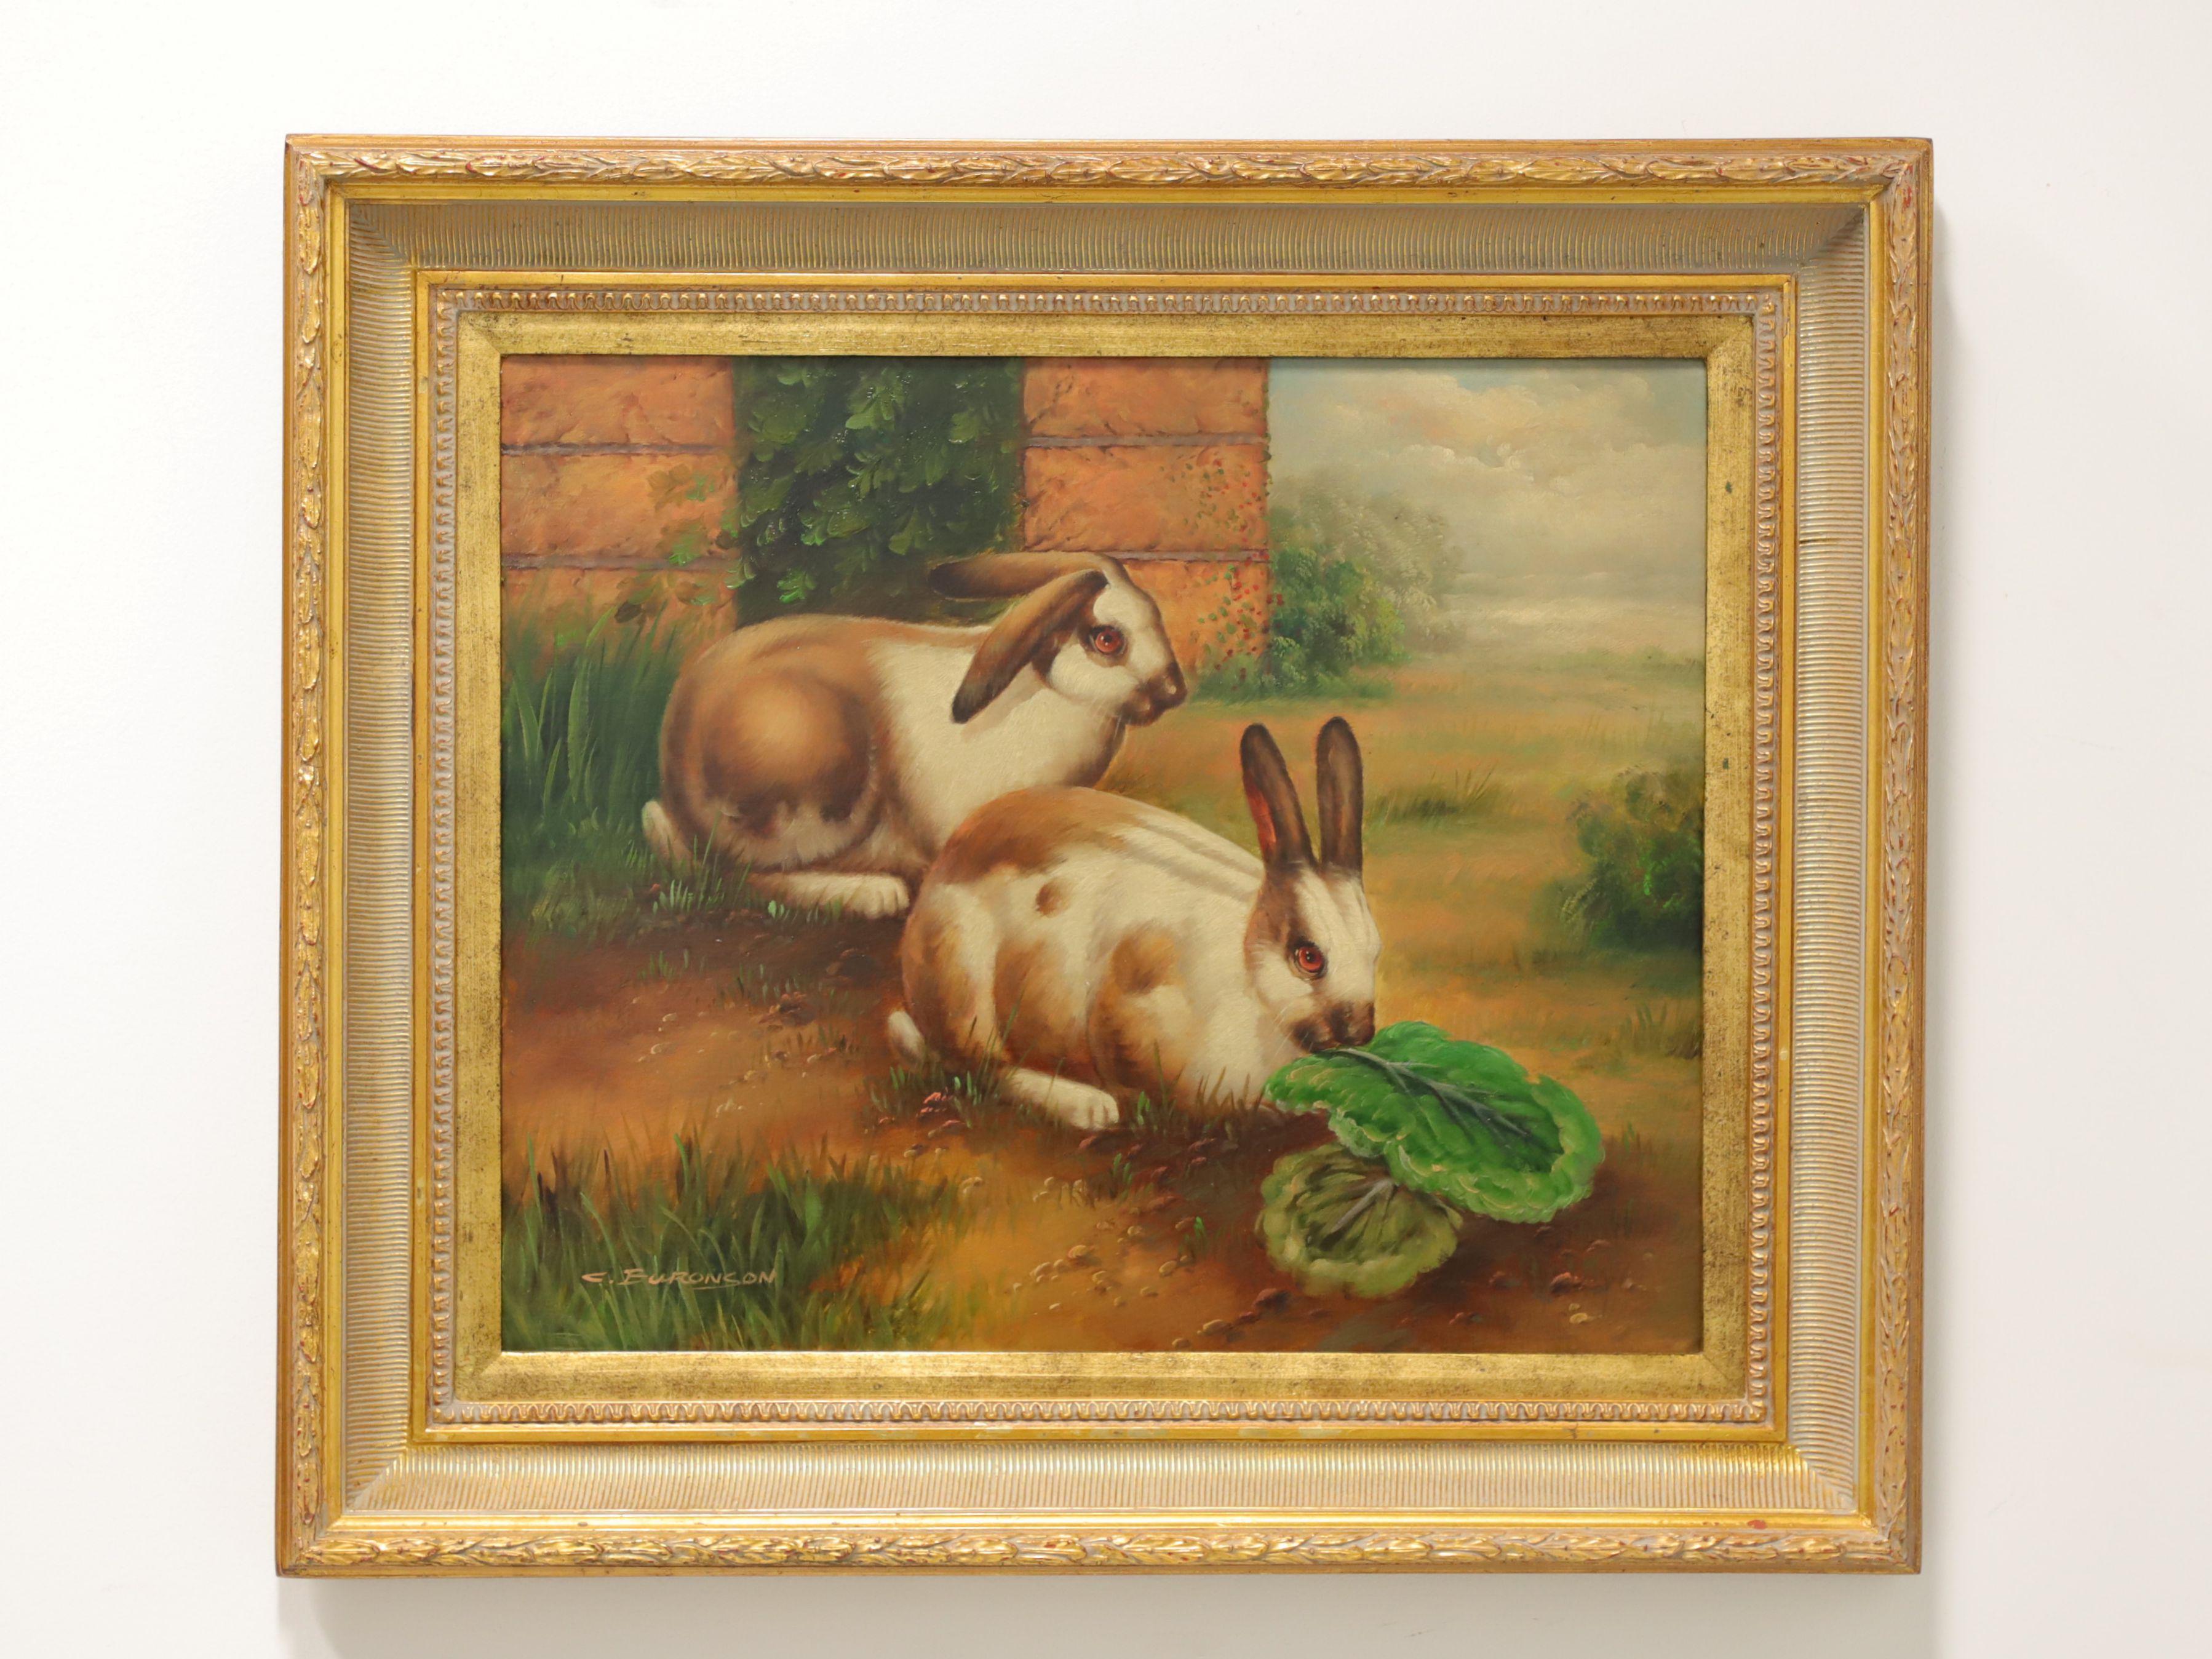 20th Century Original Oil on Canvas Painting - Bunnies - Signed C. Buronson For Sale 1